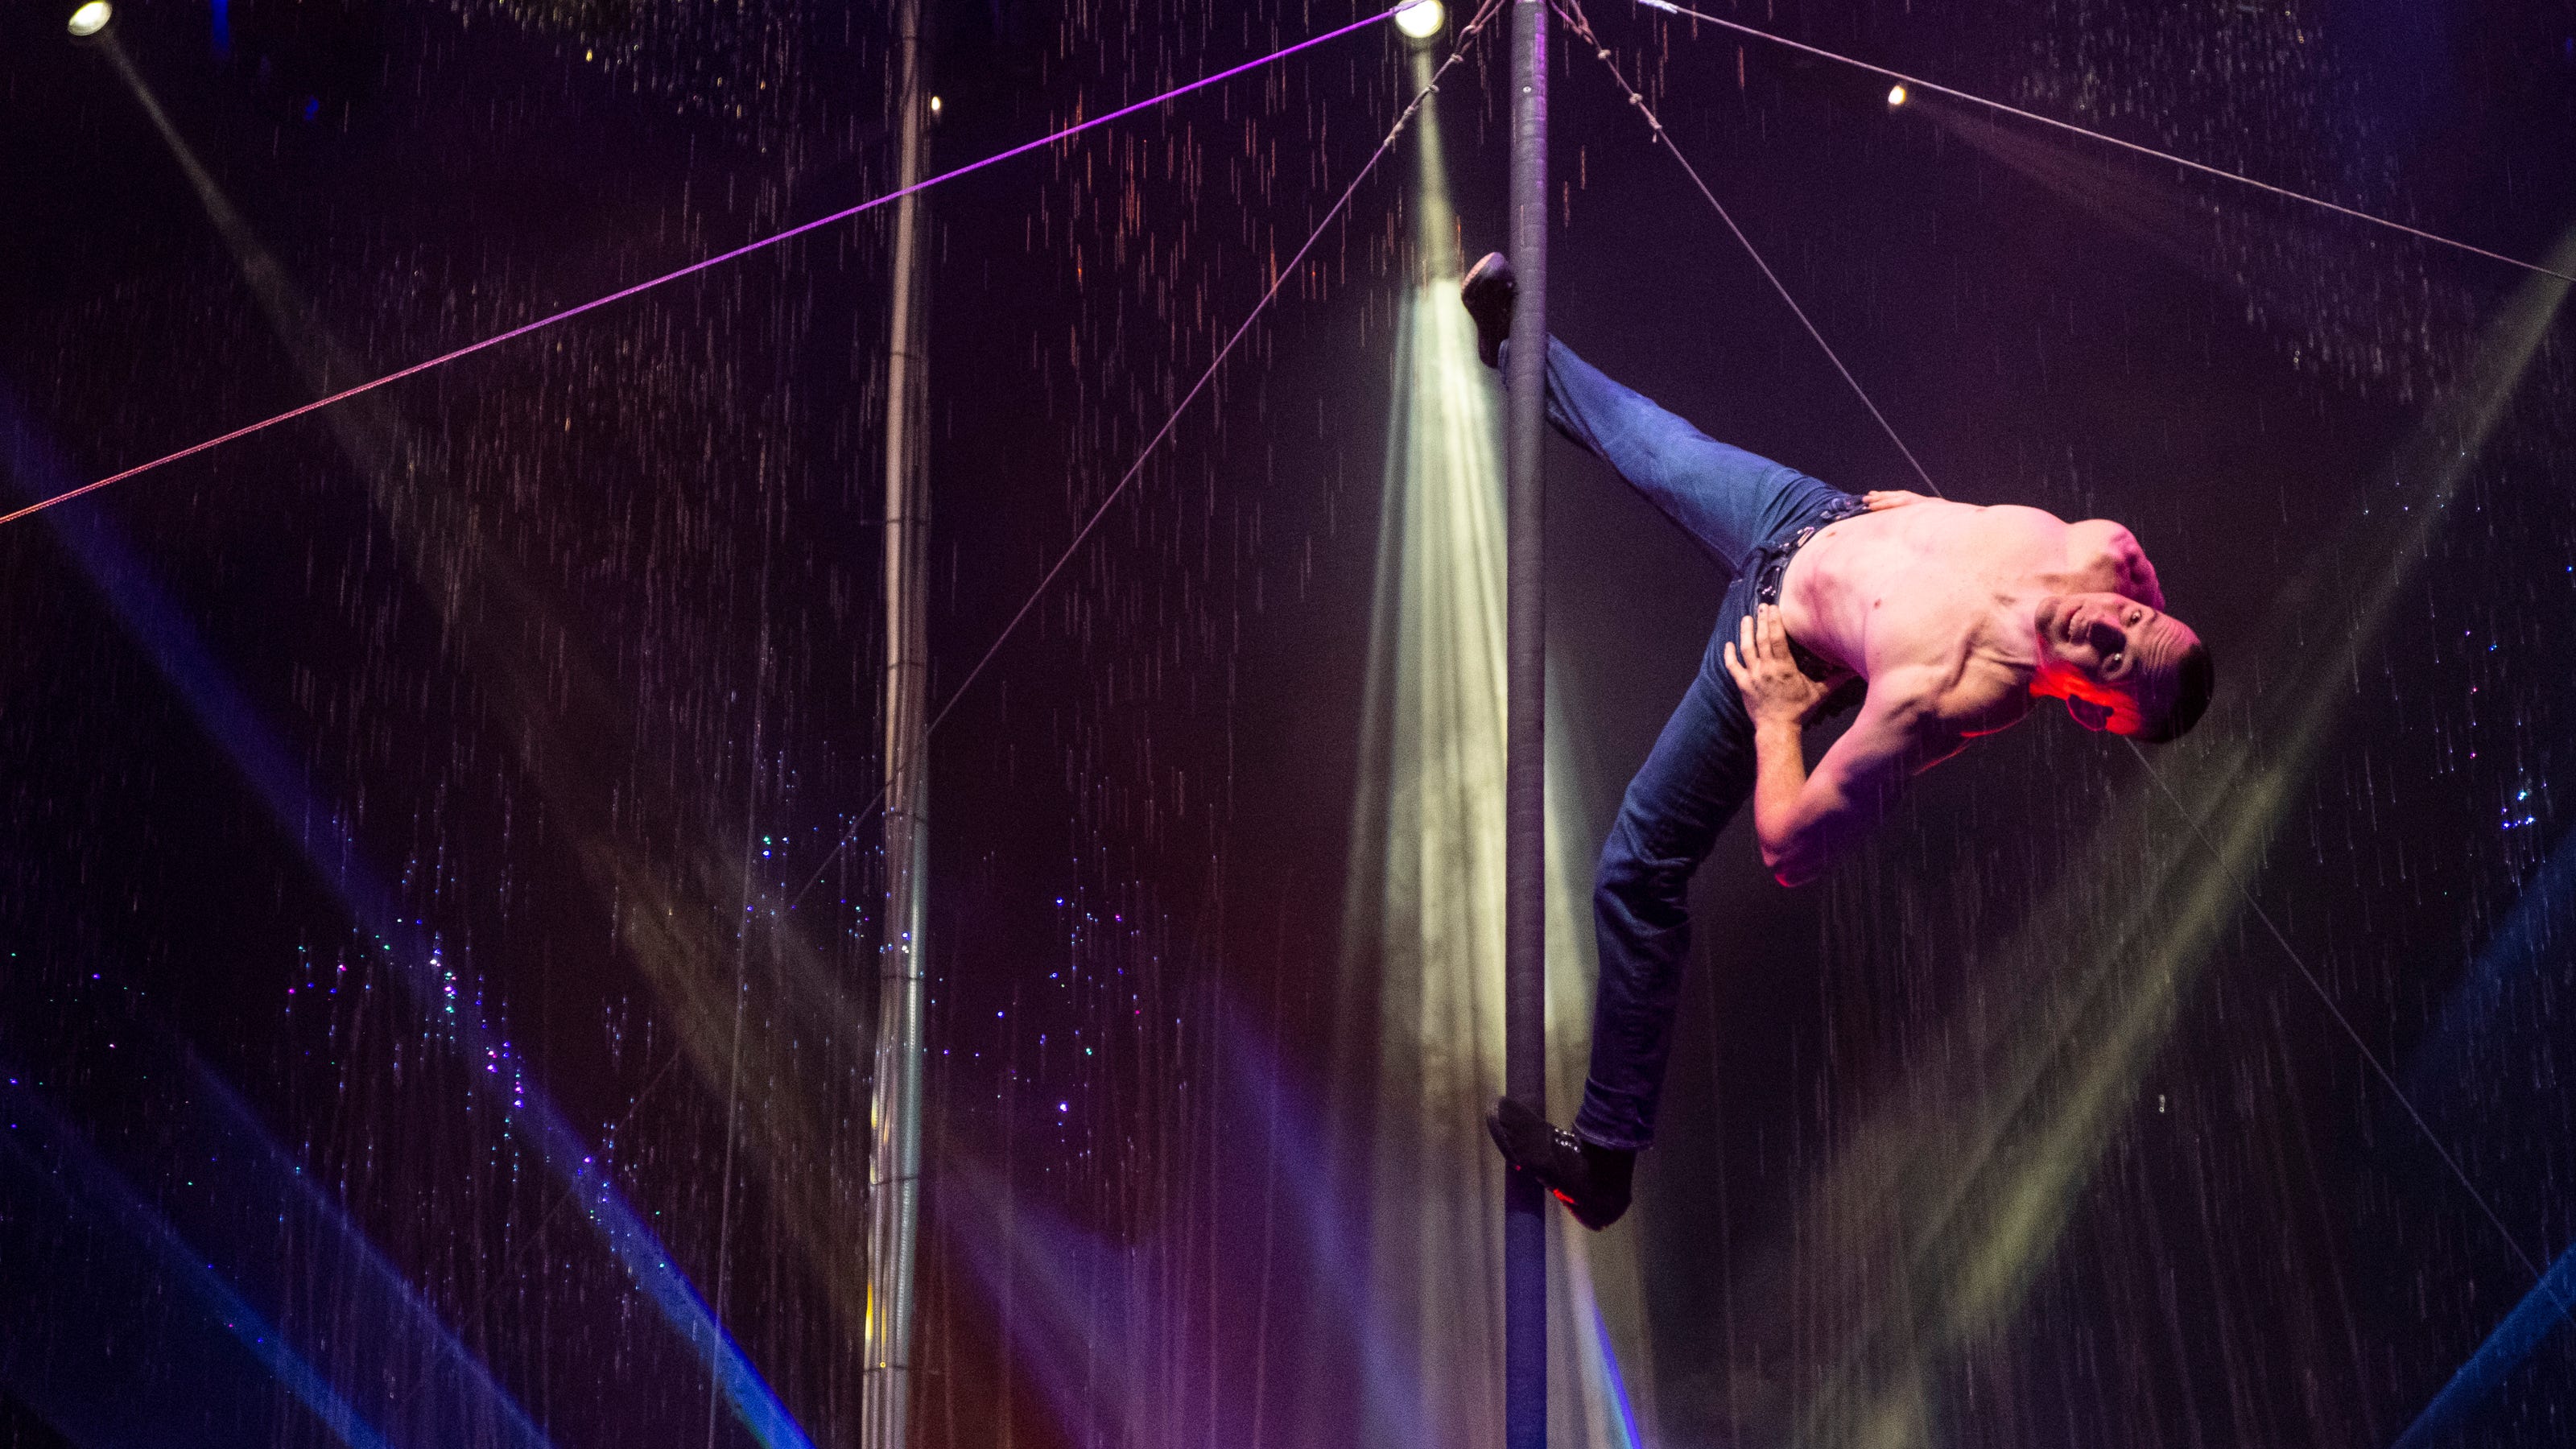 Cirque Italia brings its colorful water circus to Fort Gratiot